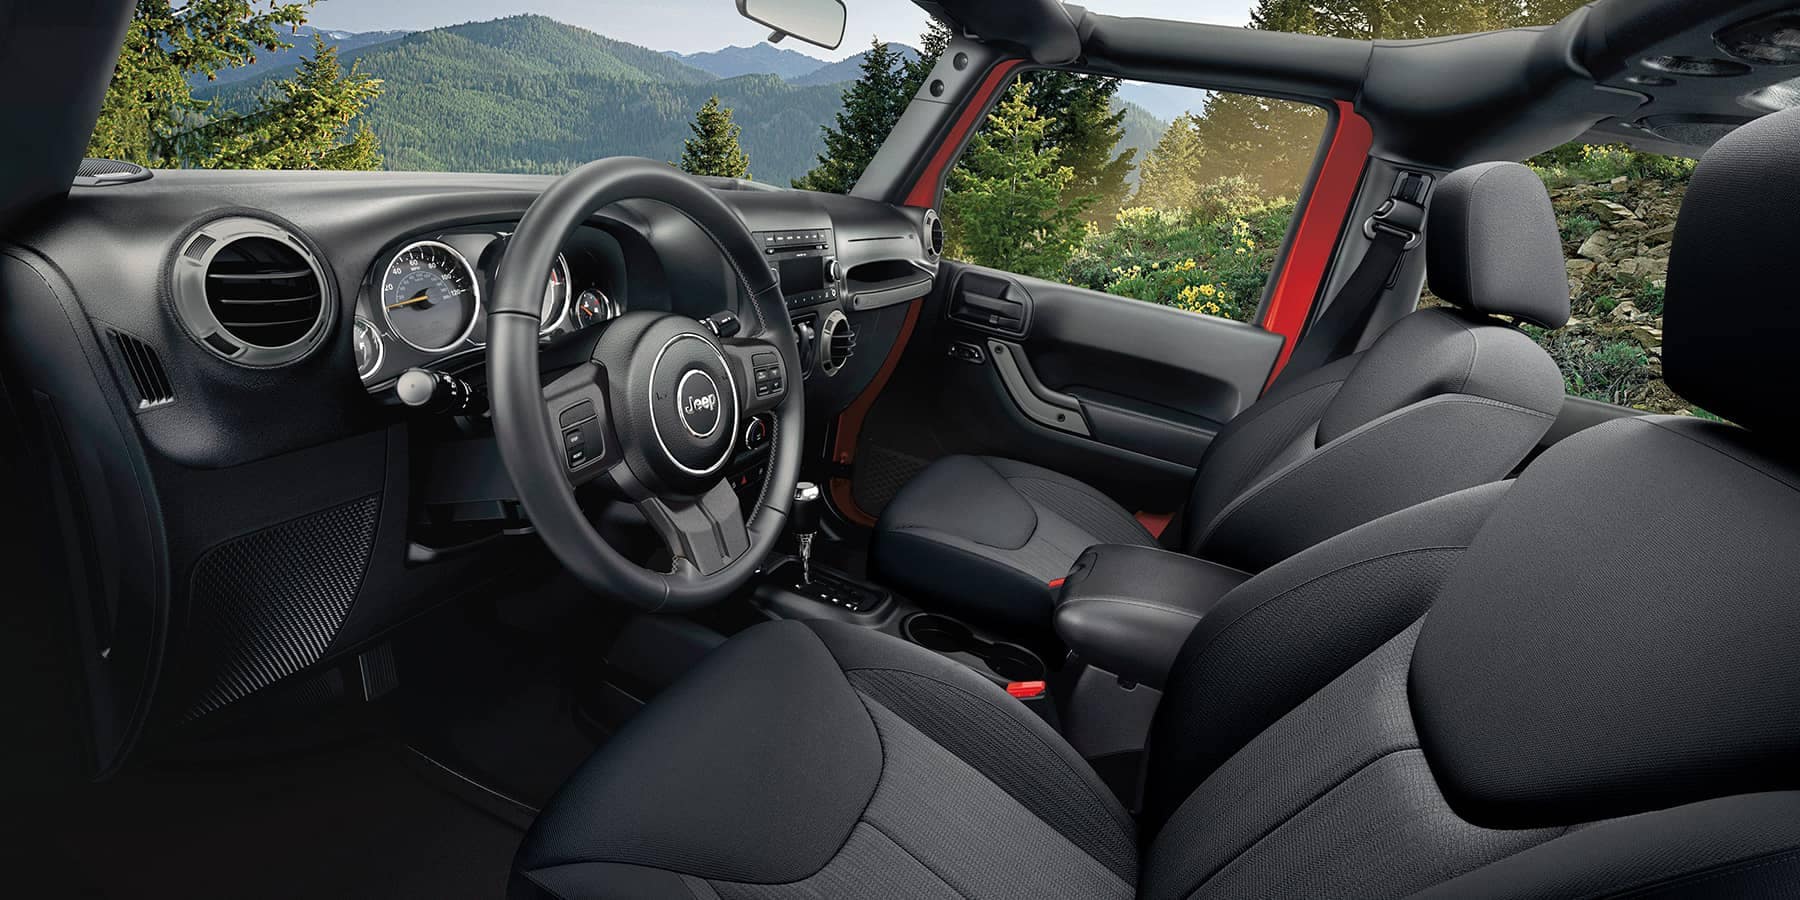 2017 Jeep Wrangler Specs & Features | Whitten Brothers of Ashland